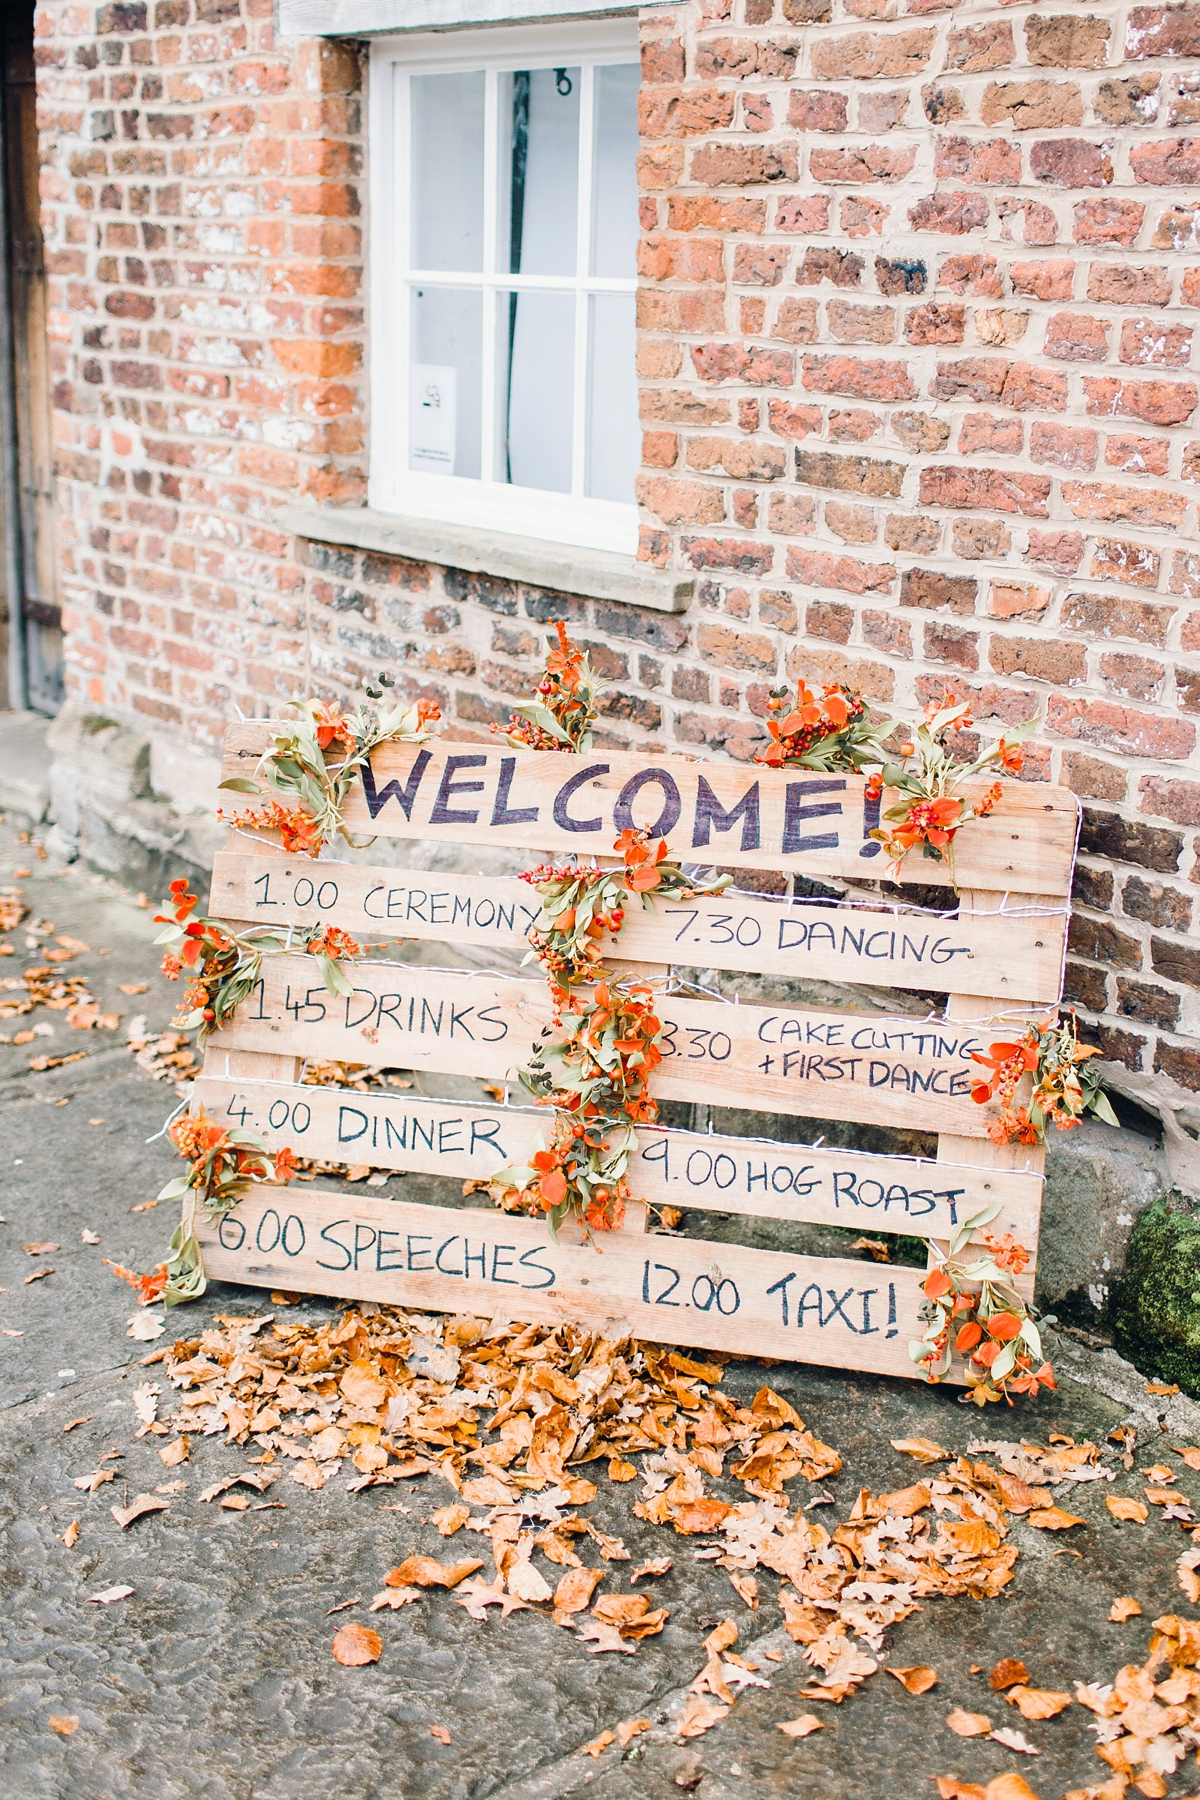 10 A Charlie Brear bride and her rustic Autumn Barn wedding in Southport